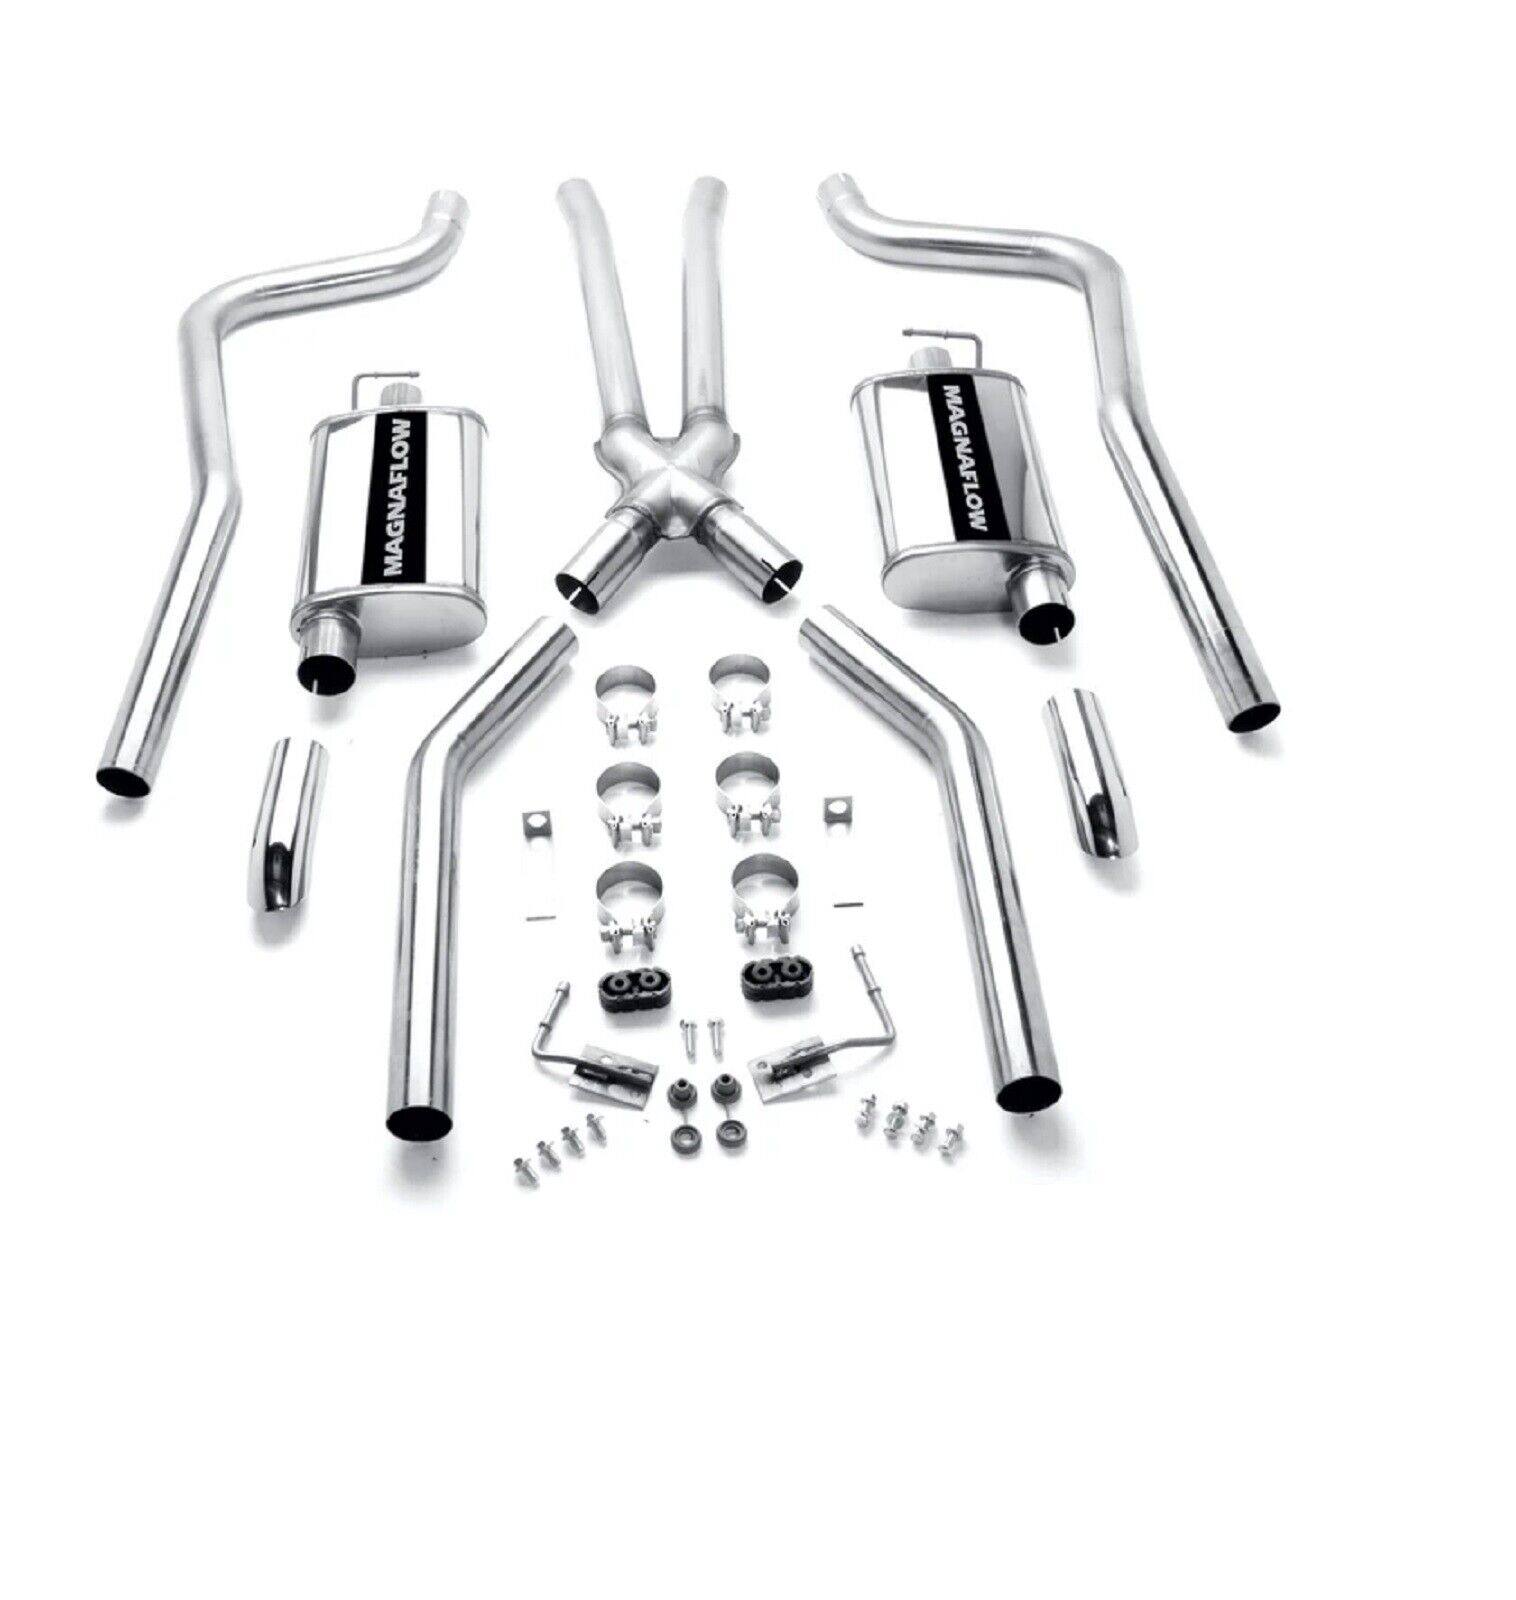 MAGNAFLOW 15851 Stainless Steel Axle-Back Exhaust Kit For 70-72 CHALLENGER V8